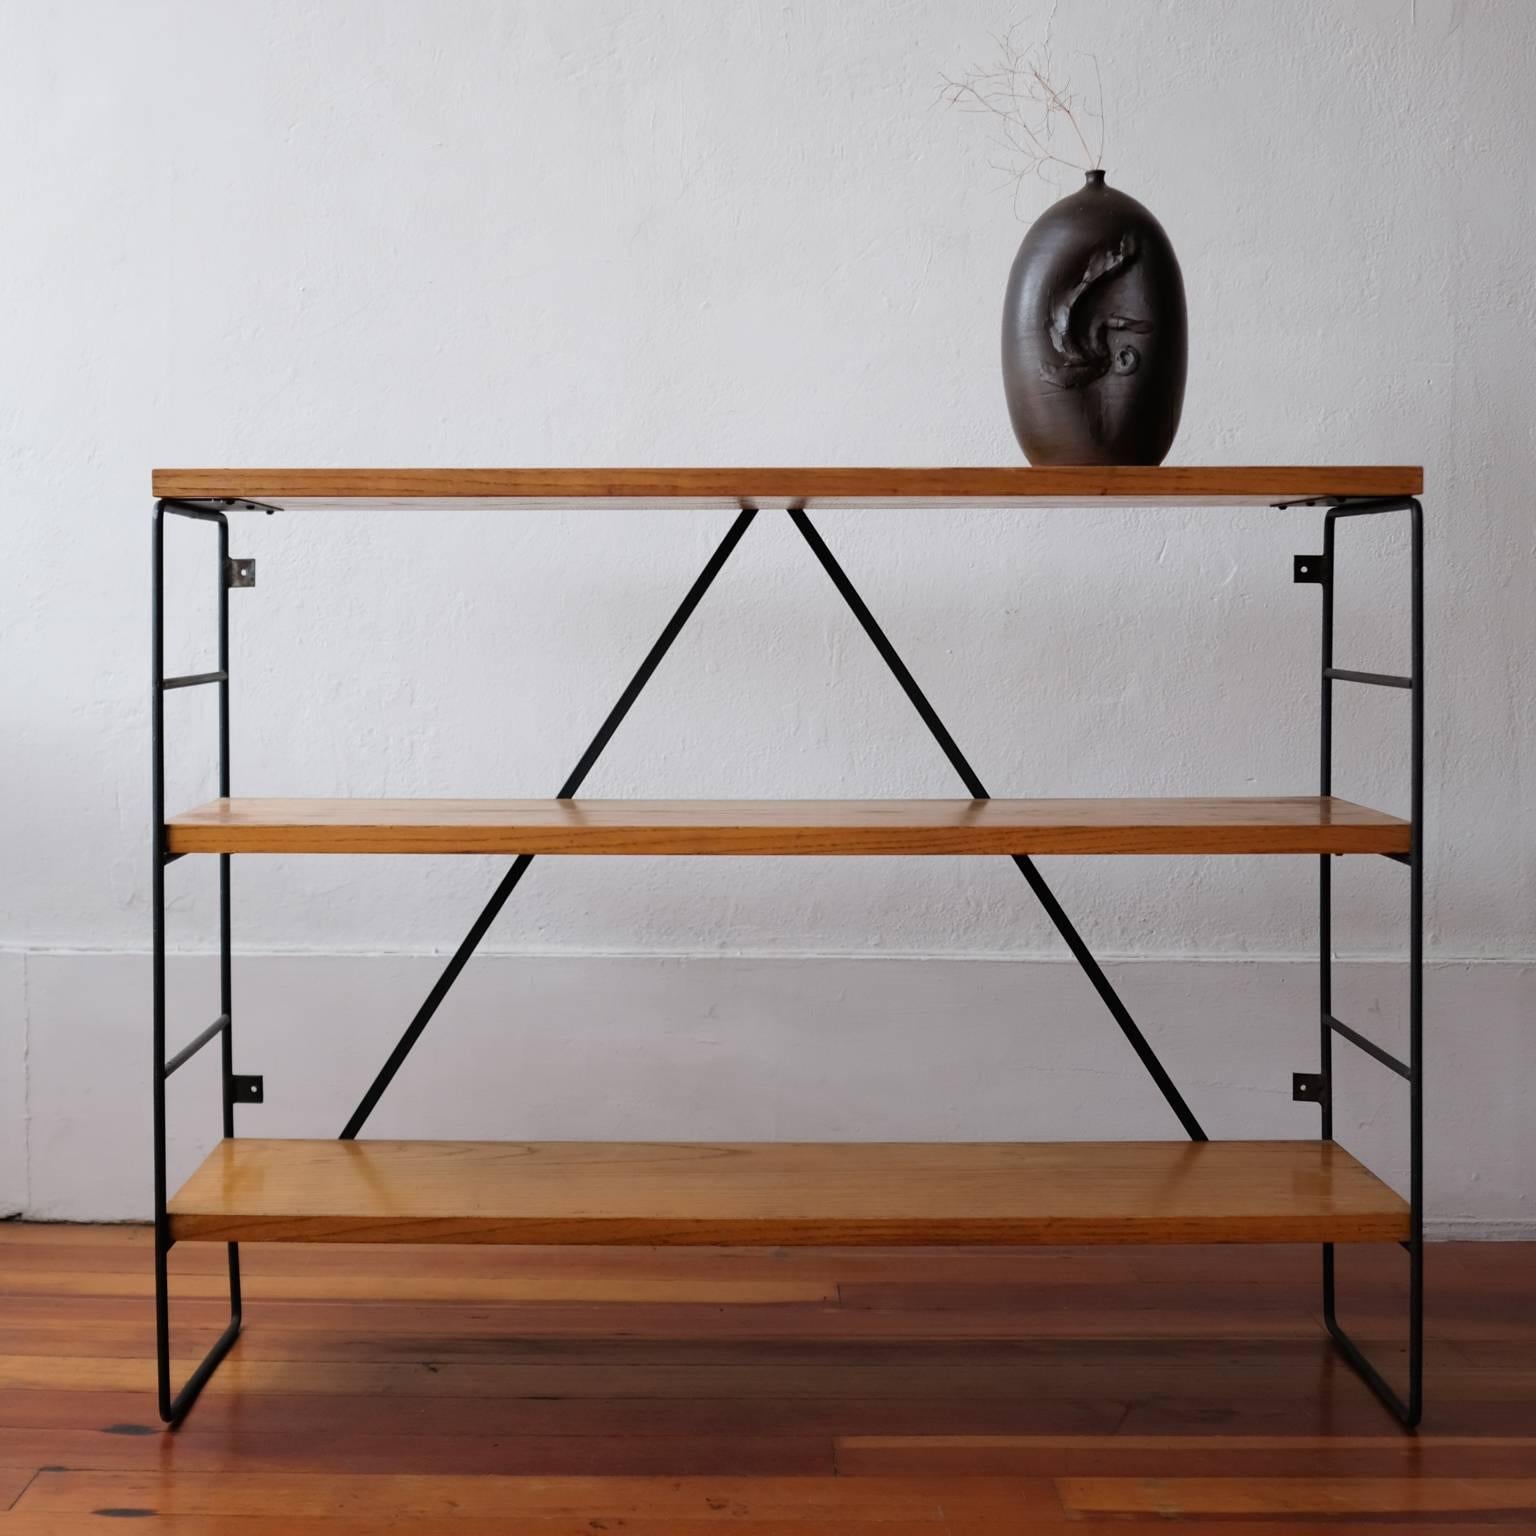 1950s iron and wood shelf. Solid wood shelves and iron frame. Well-built and extremely sturdy. The design includes tabs on the back so that it can be attached to a wall, if desired.